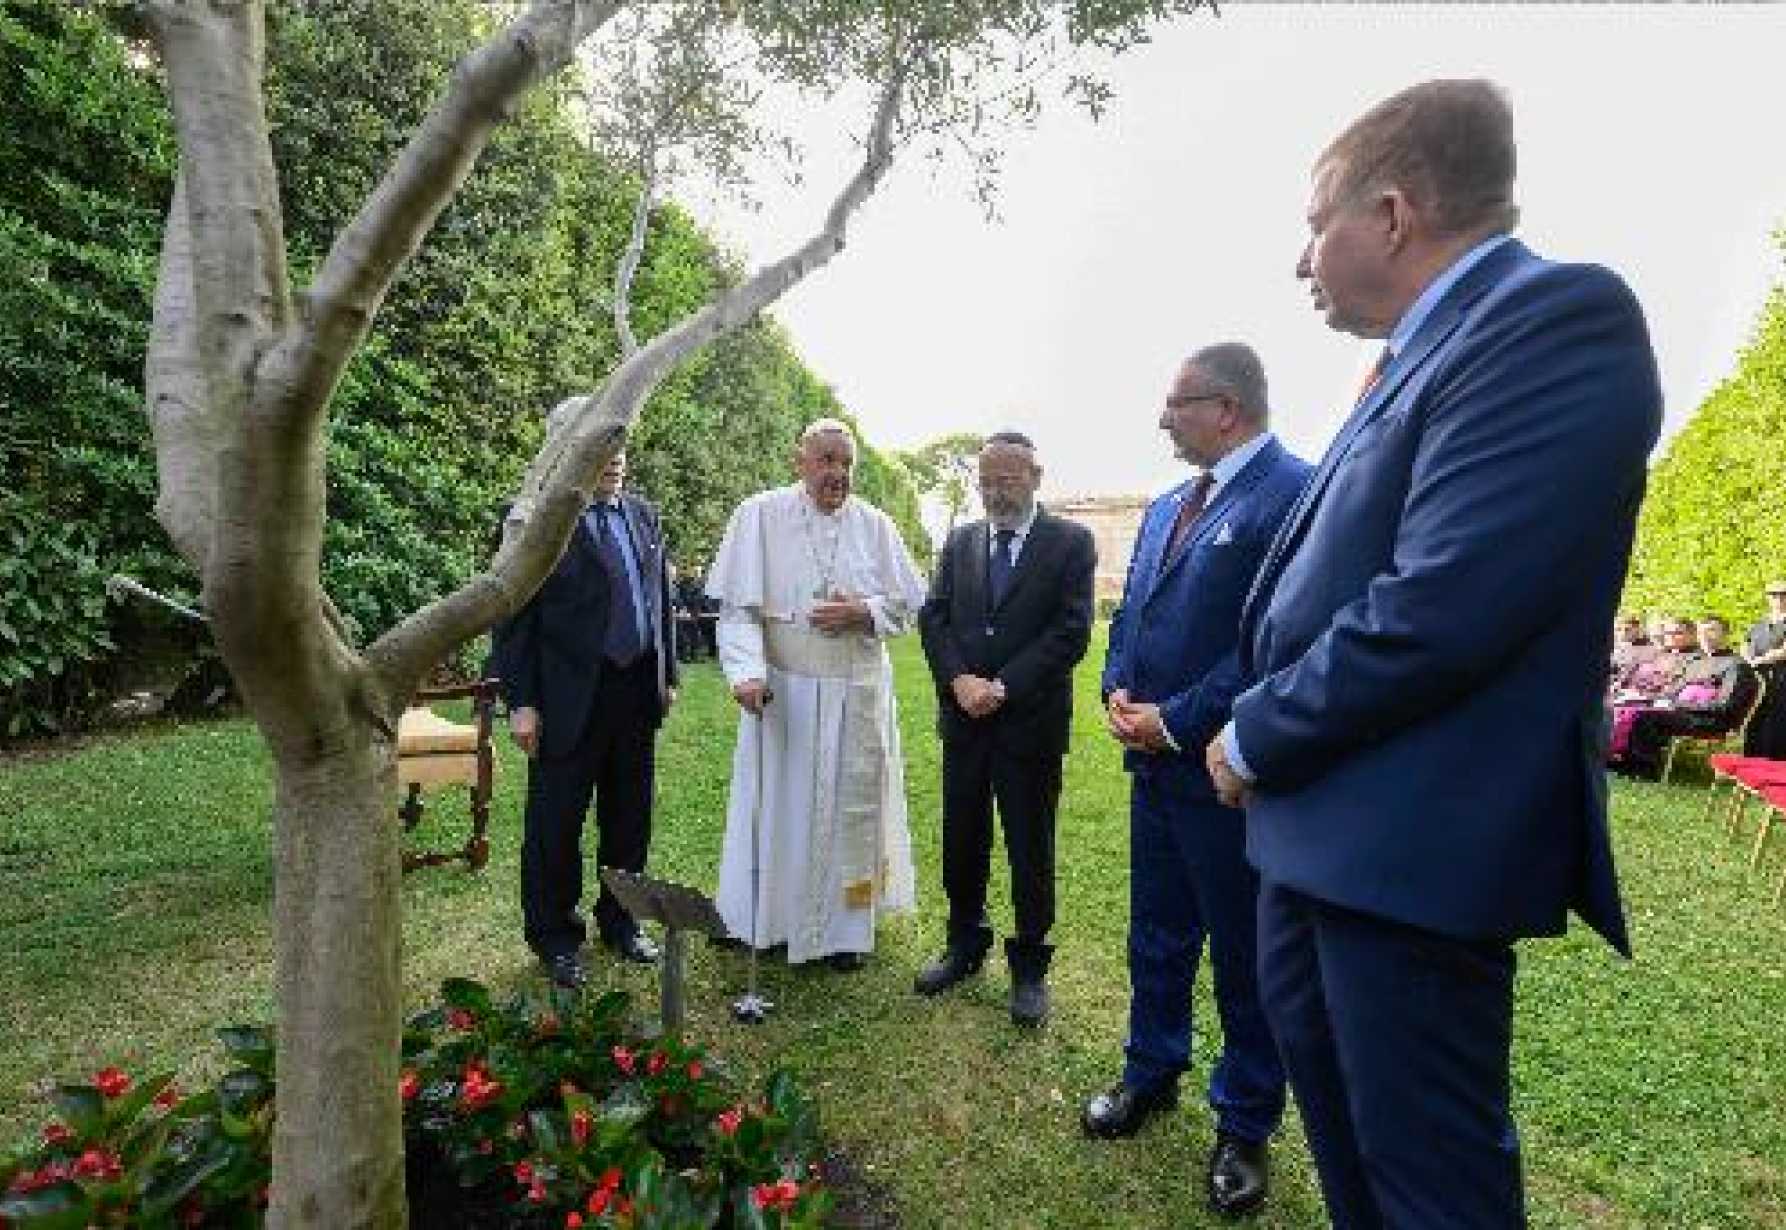 Under olive tree planted as sign of peace, pope begs God to help Holy Land